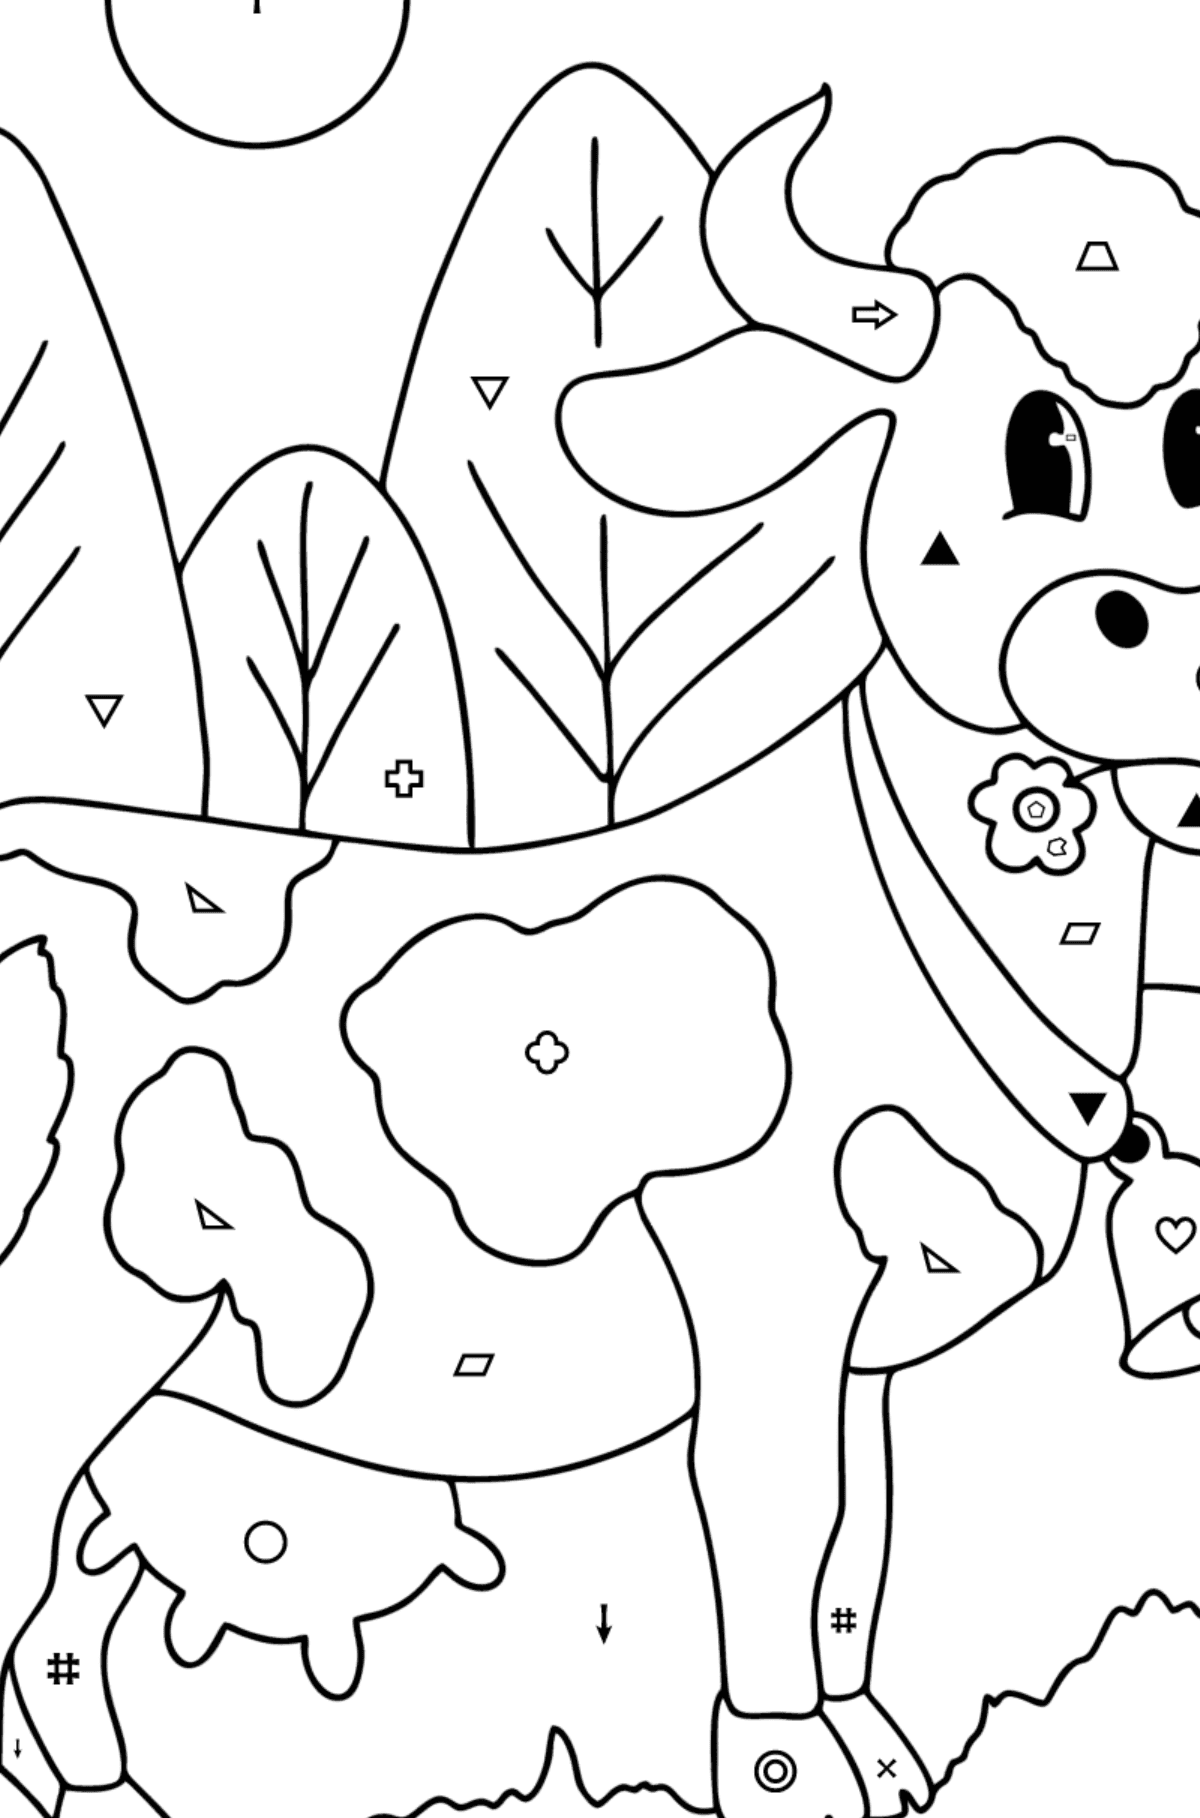 Realistic cow coloring page - Coloring by Symbols and Geometric Shapes for Kids